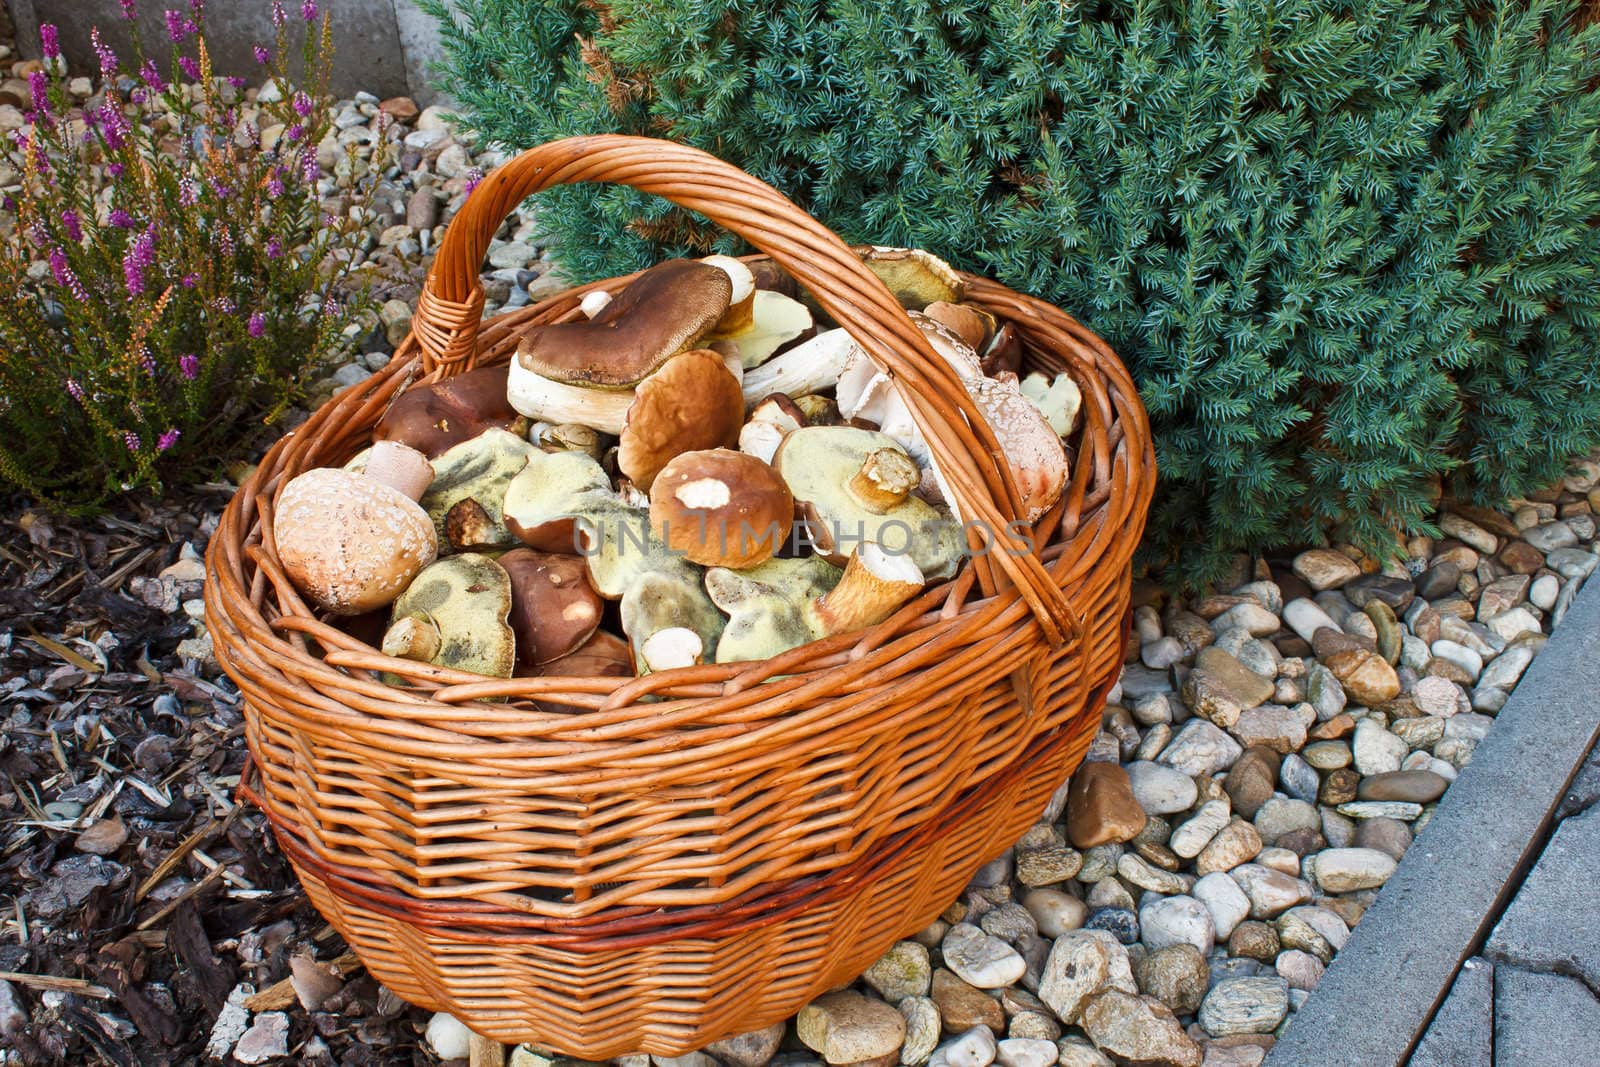 Full basket of fresh autumn mushroom, founded in forest by artush